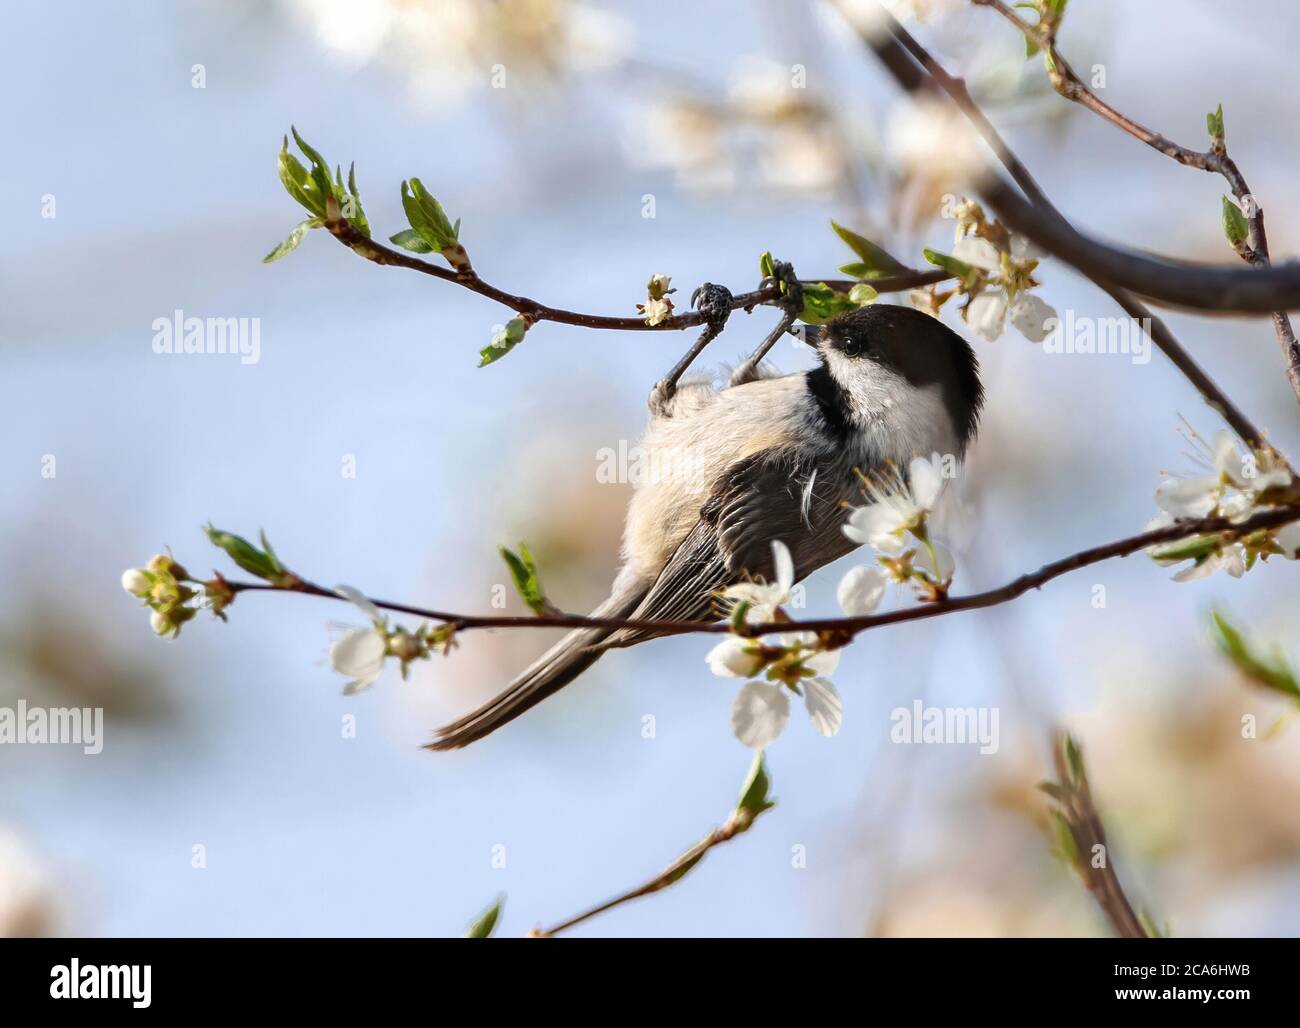 A Black-capped Chickadee hanging upside down on the twig of a Cherry tree in the Spring. Stock Photo